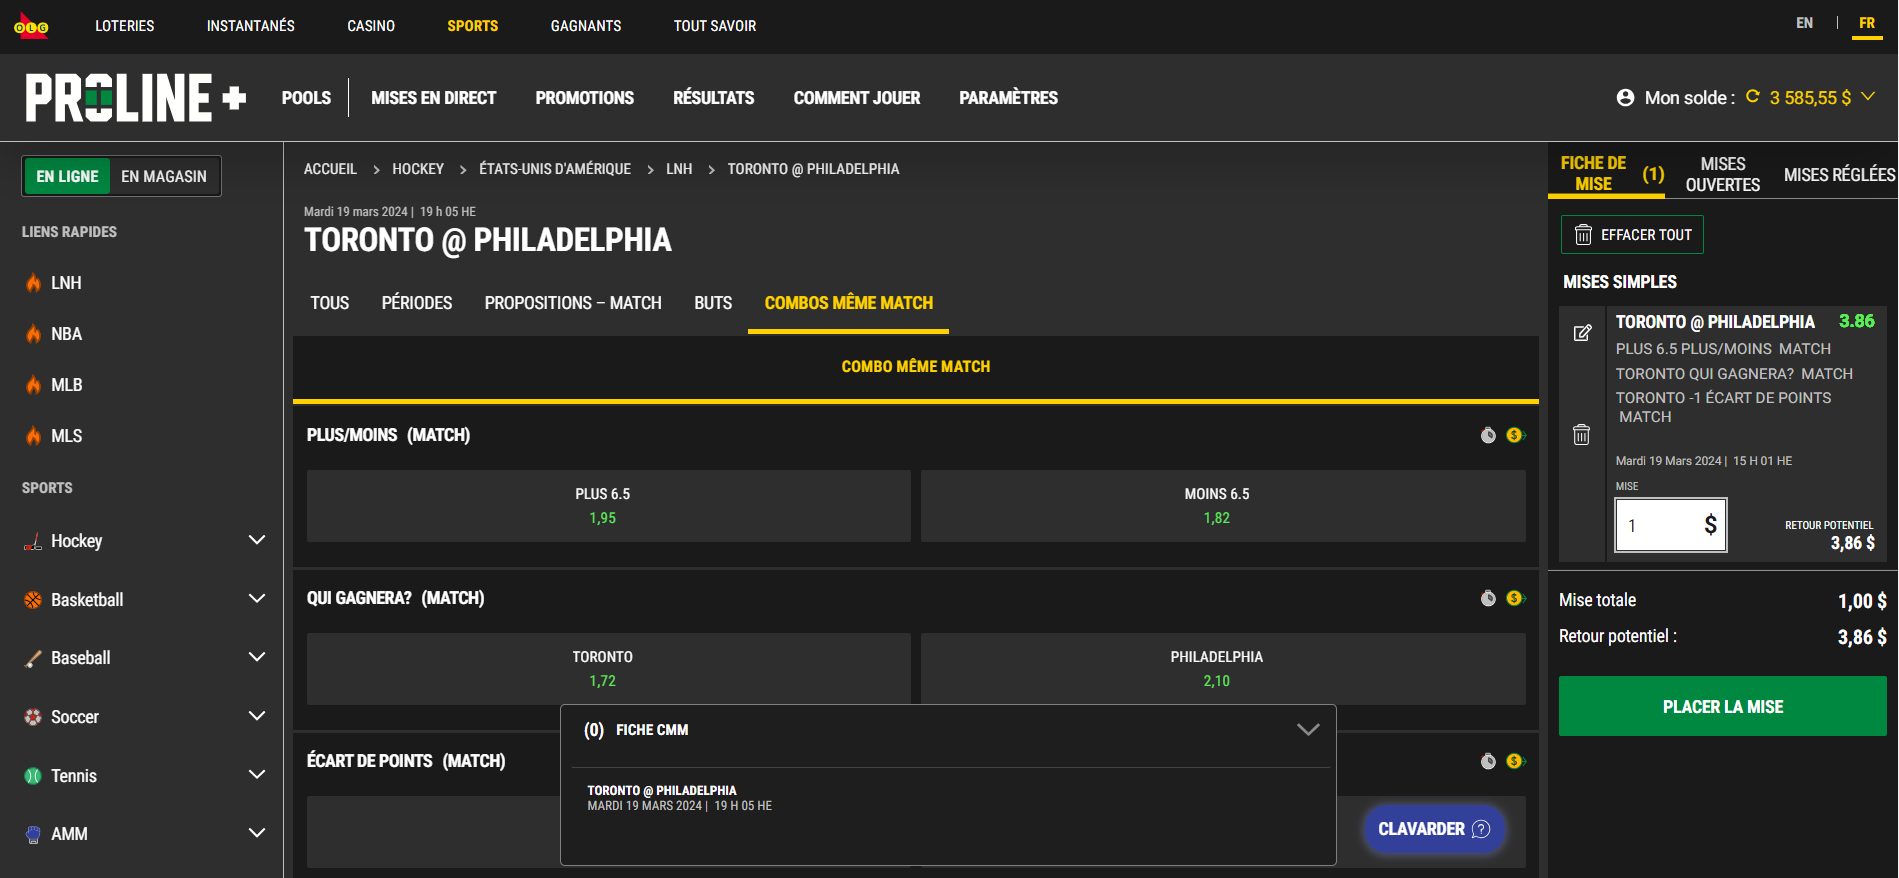 Screenshot showing a completed Same Game Parlay bet completed on the betslip